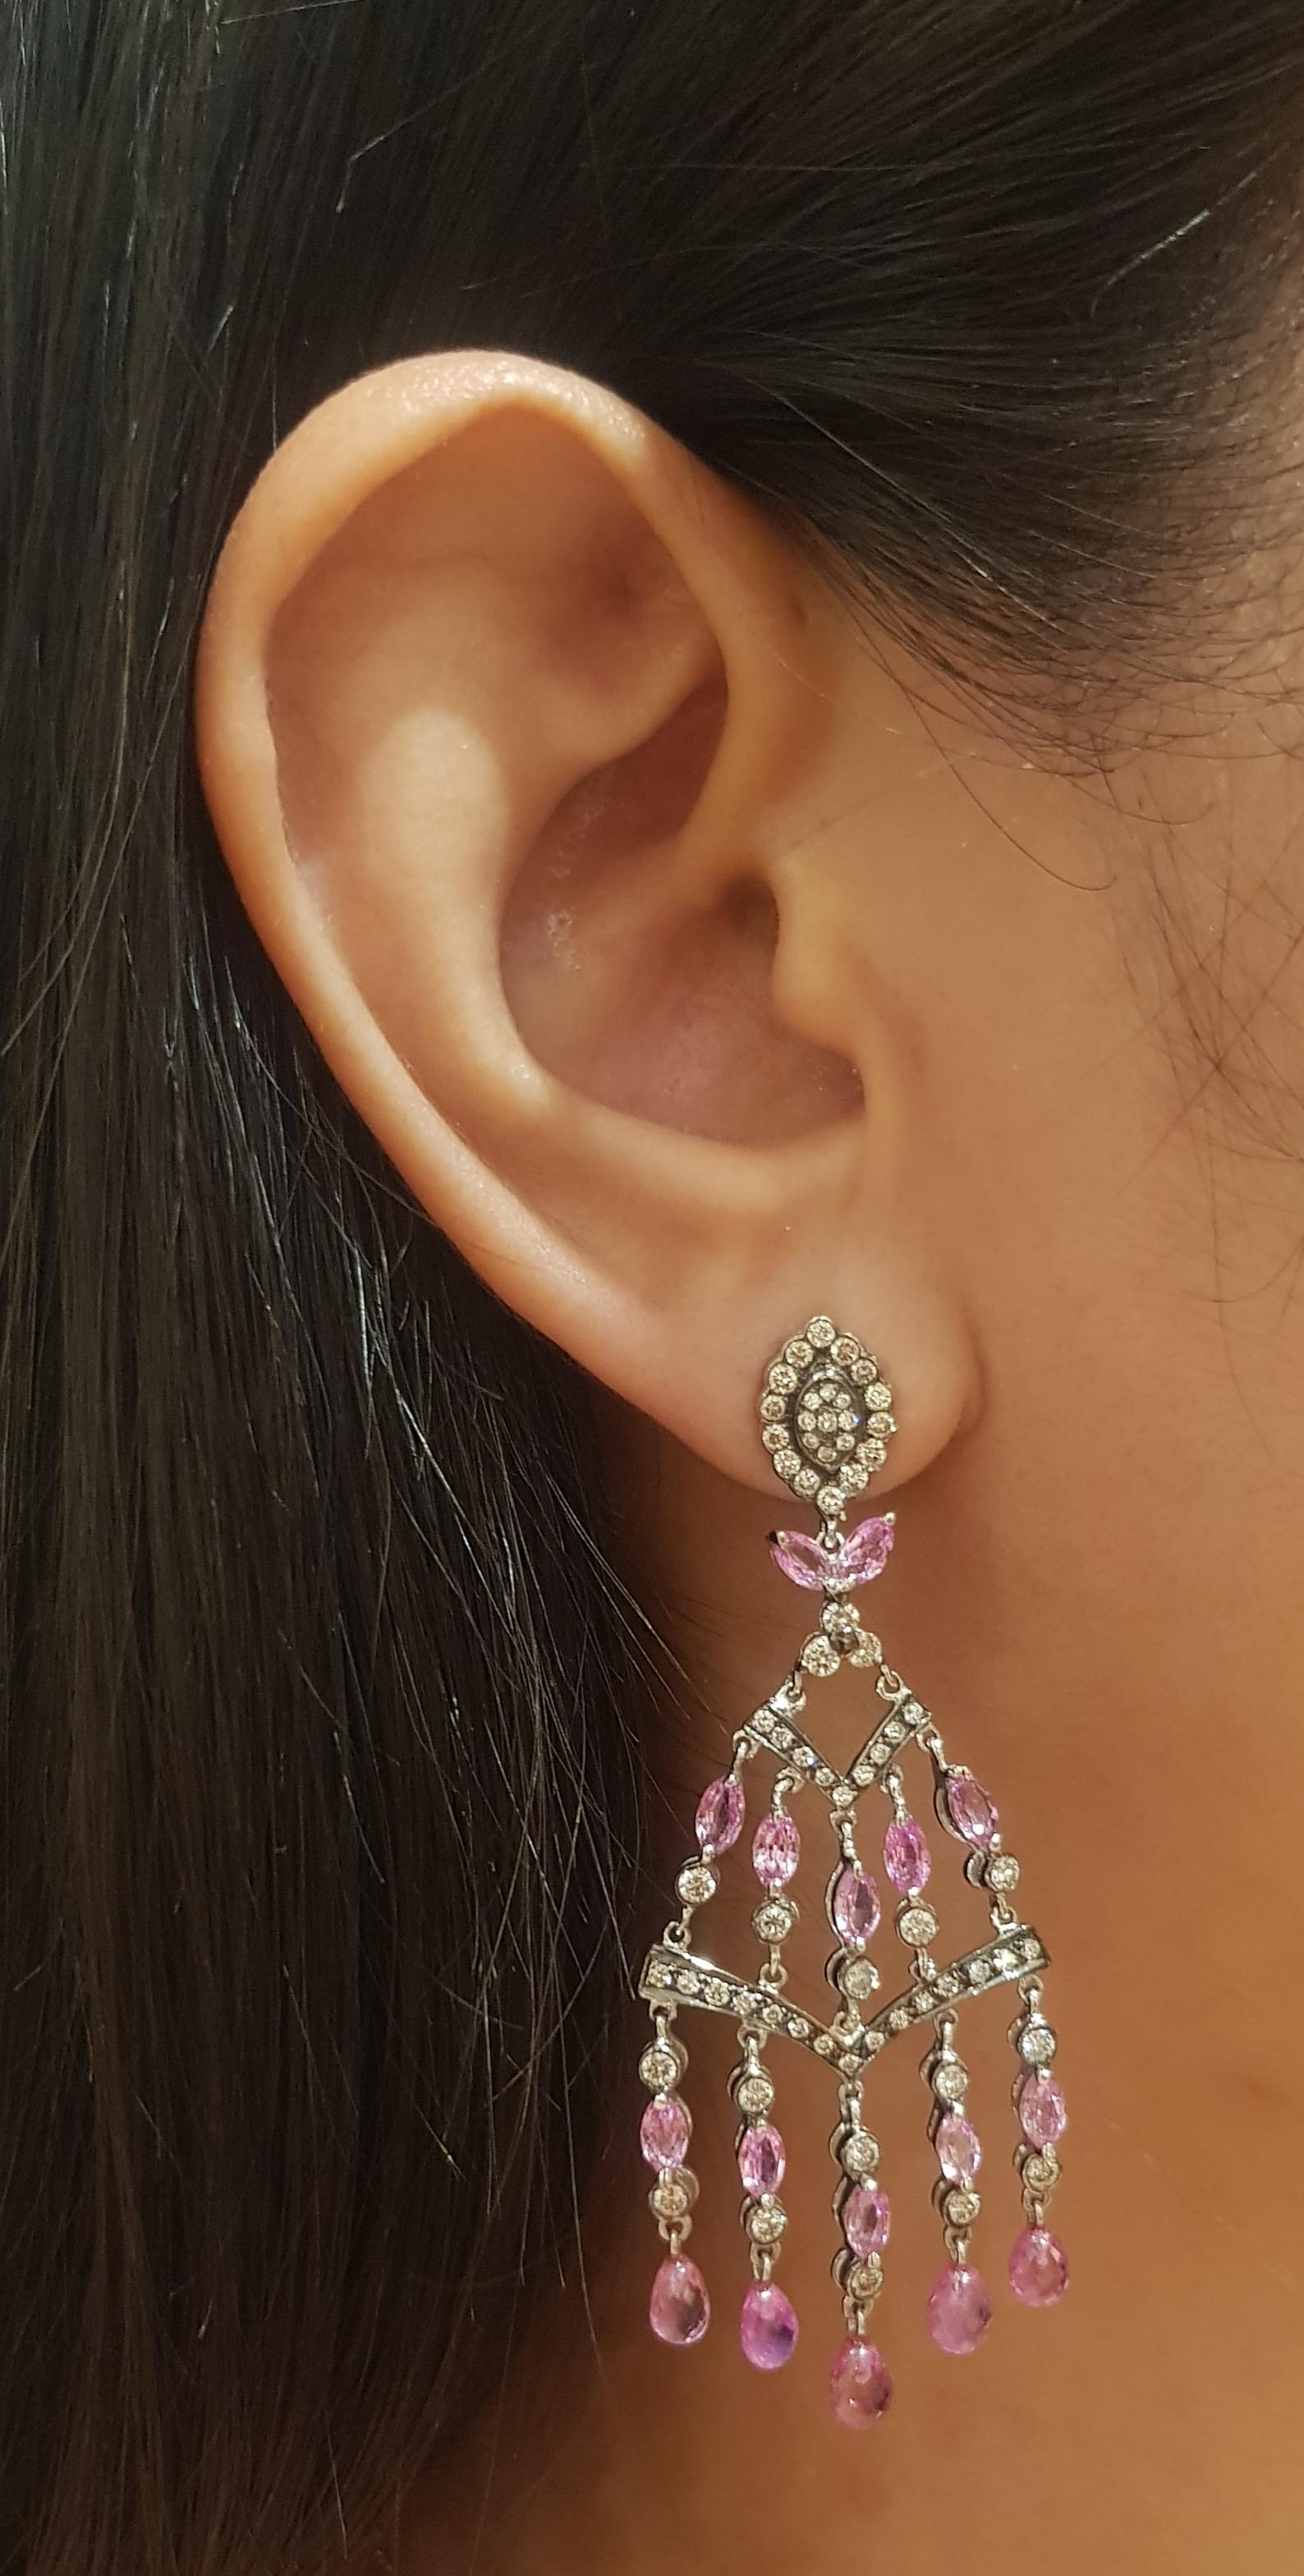 Pink Sapphire 11.23 carats and Diamond 2.13 carats Earrings set in 18K White Gold Settings

Width: 2.5 cm 
Length: 6.4 cm
Total Weight: 15.57 grams

